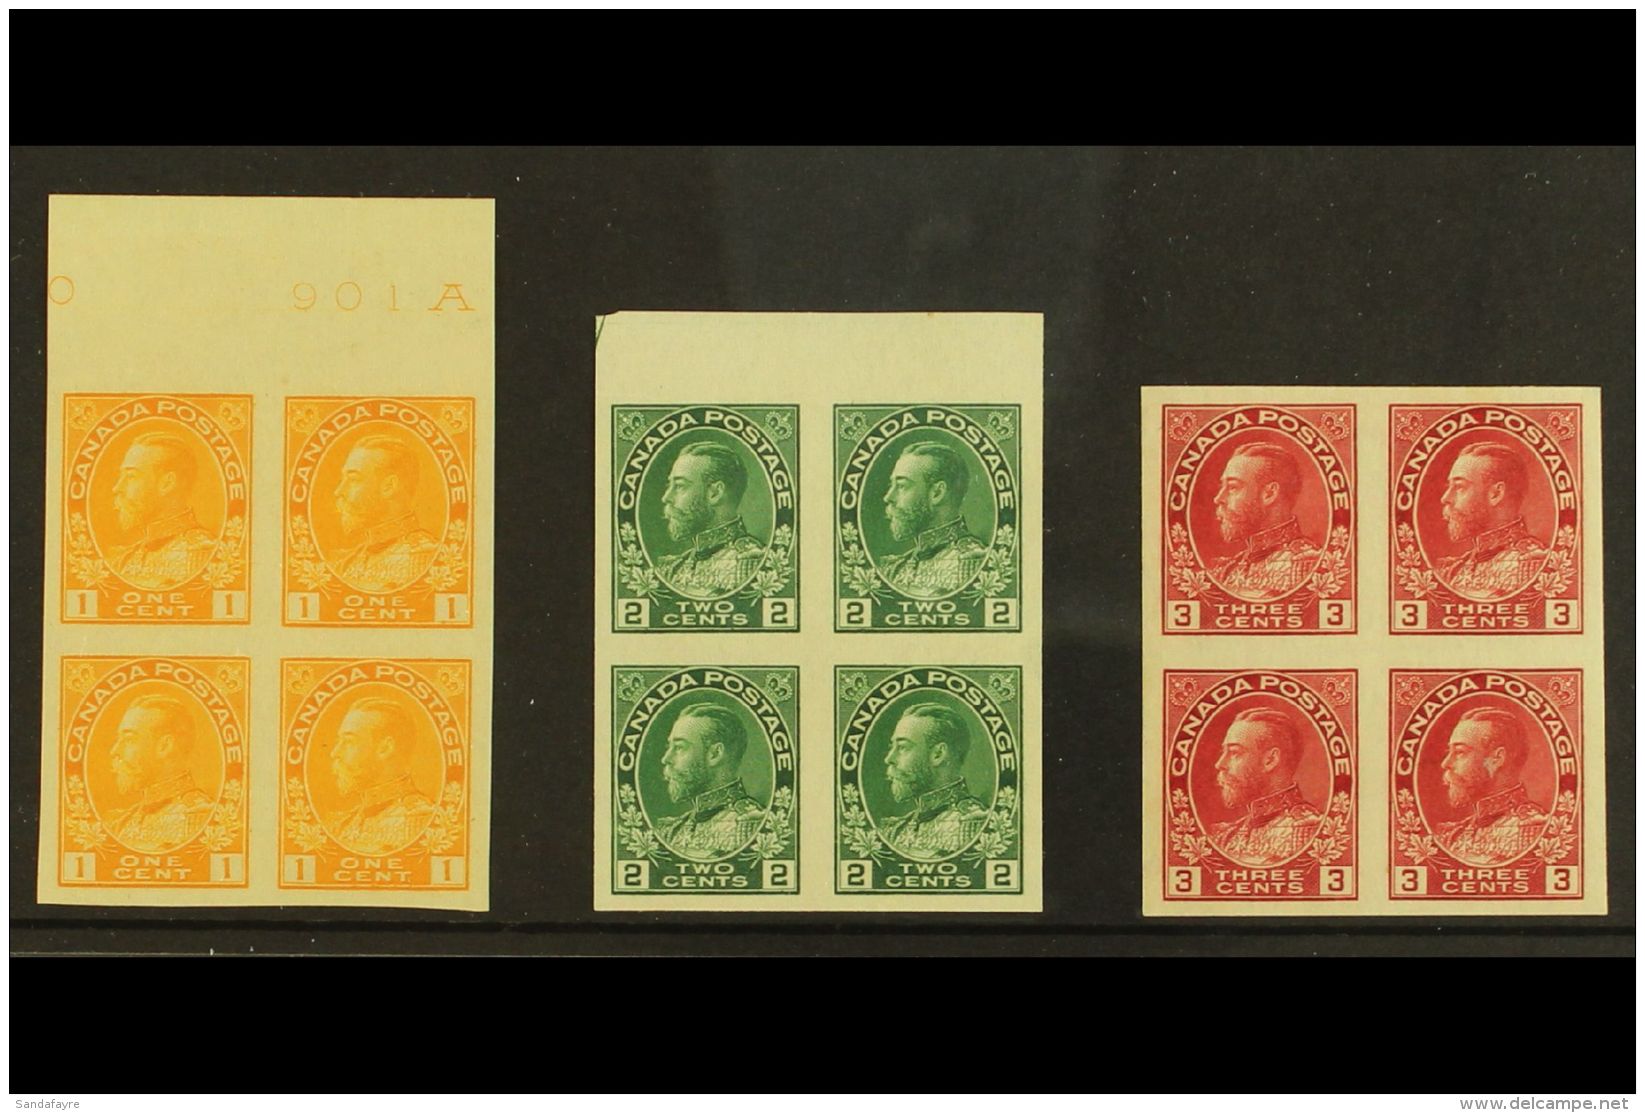 1922-31 1c Chrome, 2c Deep Green And 3c Carmine In Imperf Pairs, SG 259/61, As Very Fine  Mint Blocks Of 4, 2 NHM,... - Maurice (...-1967)